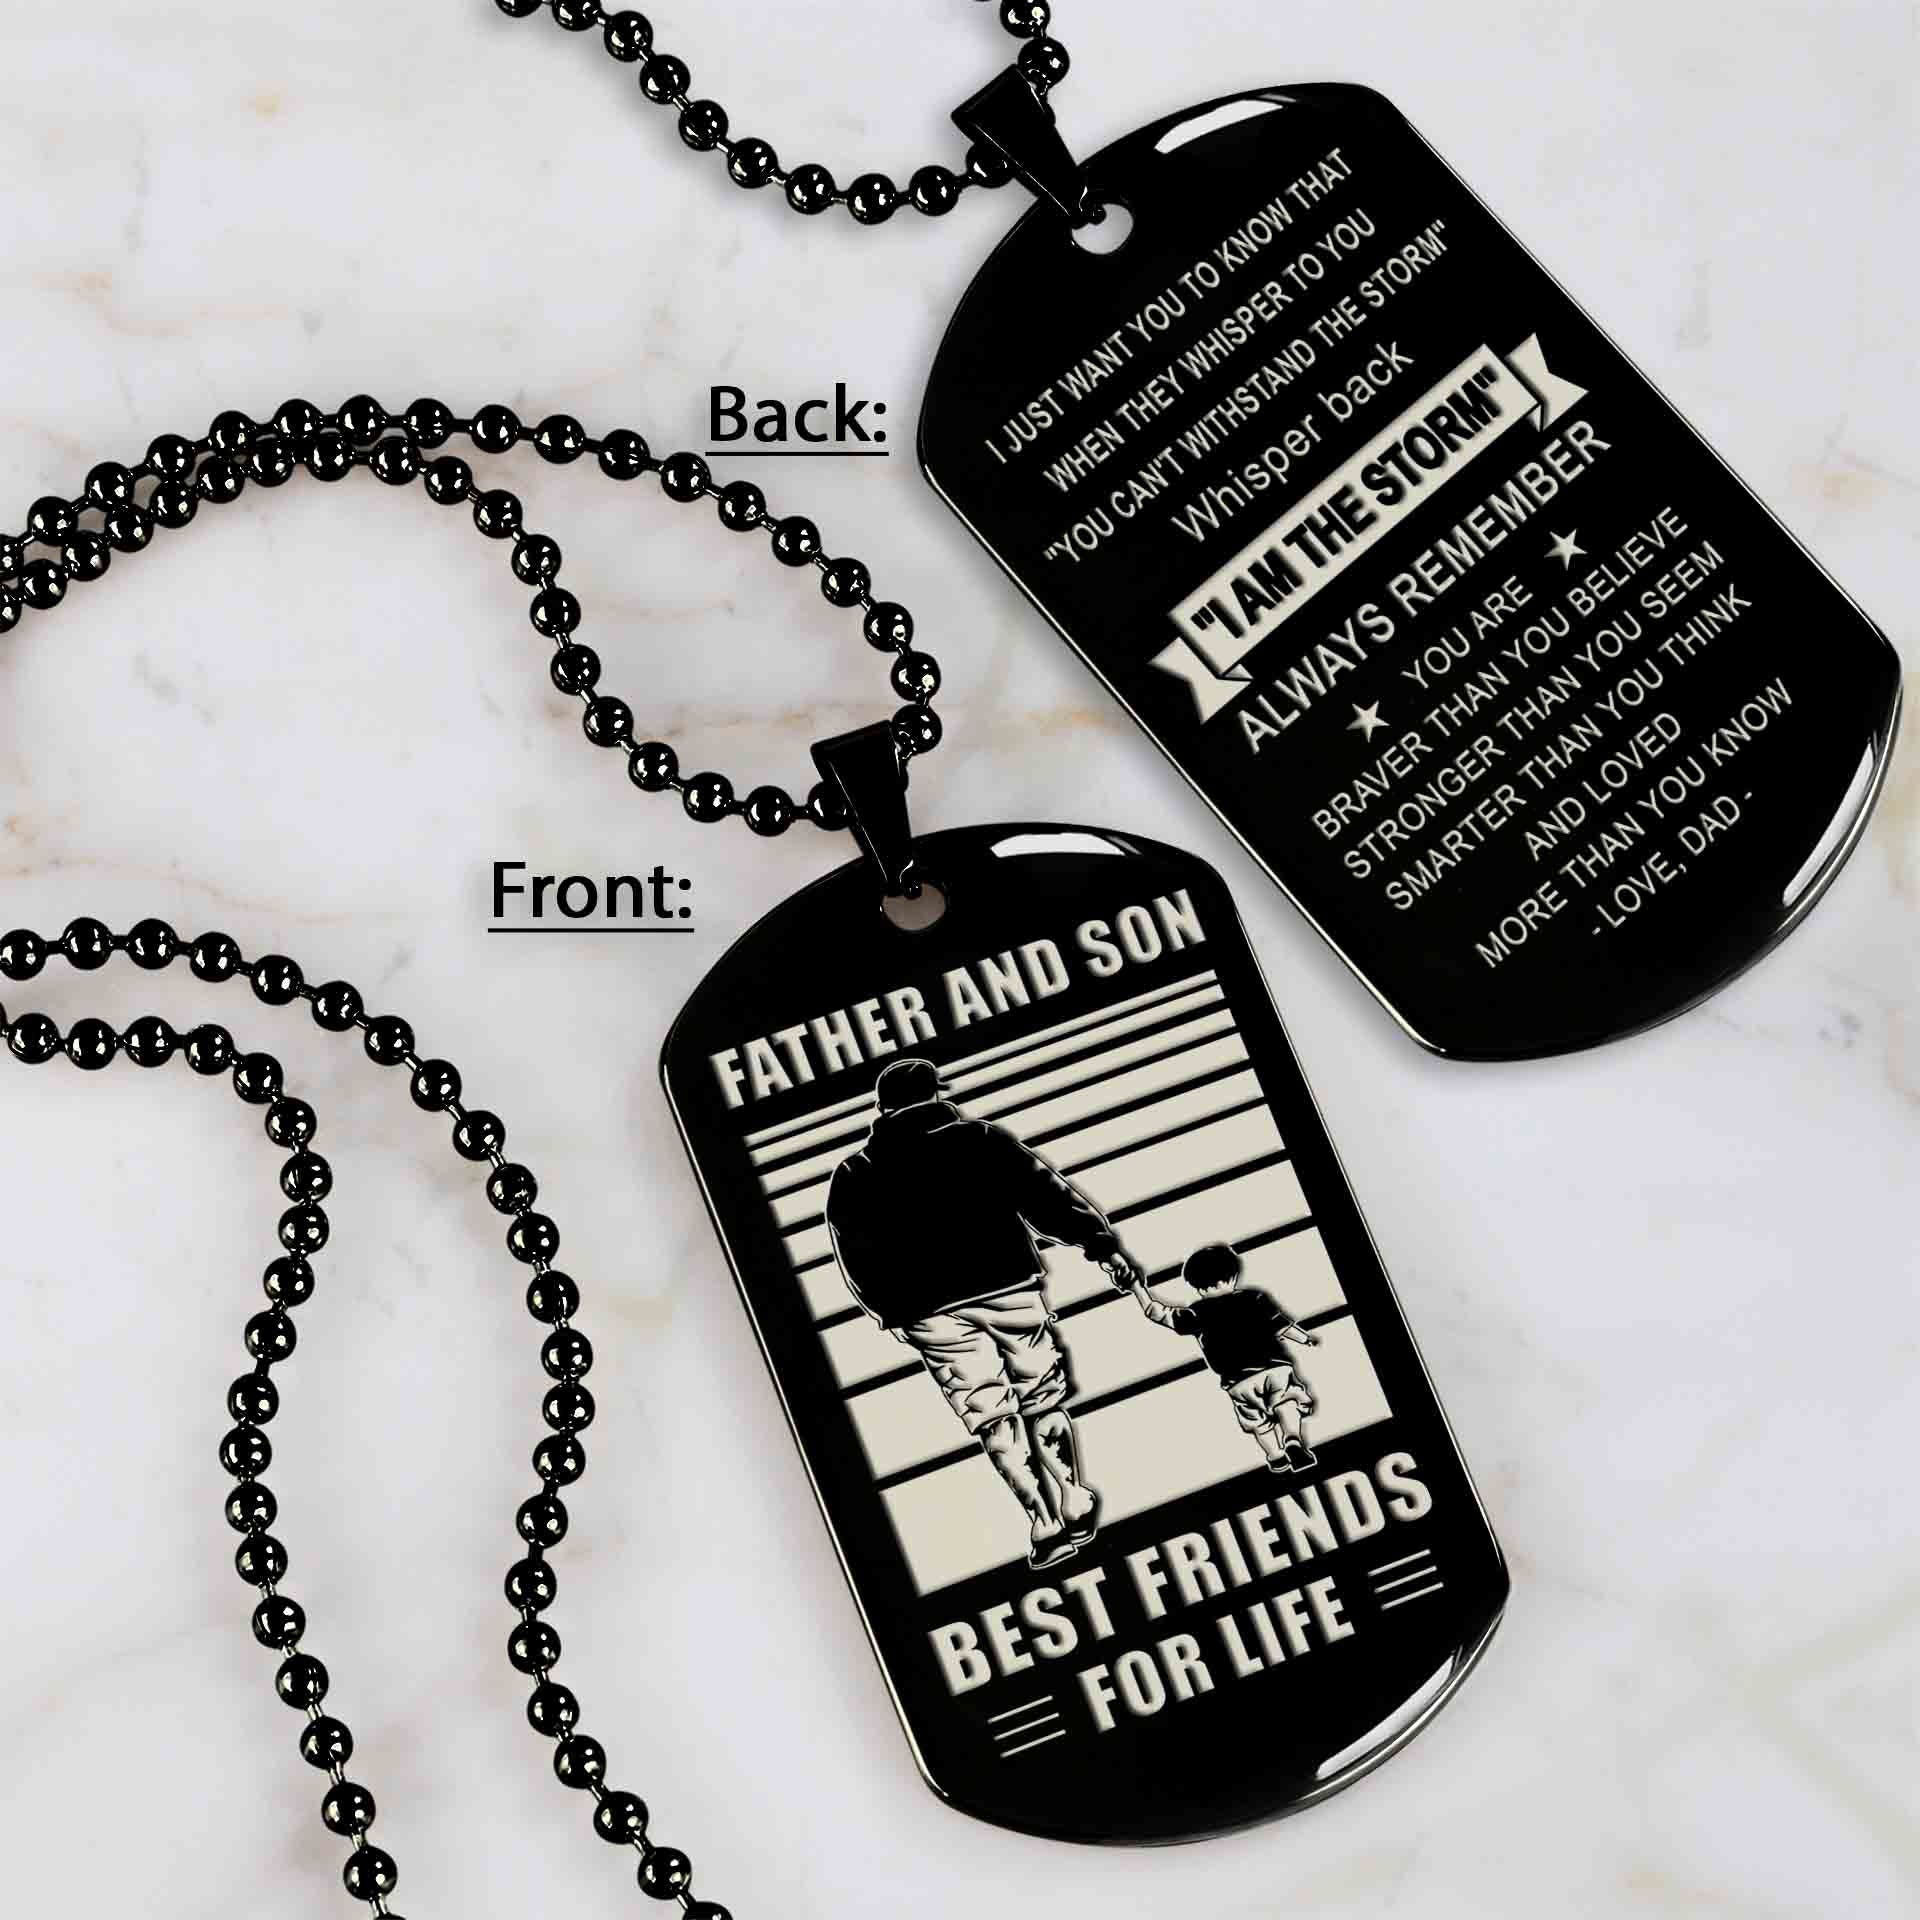 TM12 - Dad Son- Alway remember you are braver than you believe - Dog Tag Two Side- Dragon Ball - Viking-Dad Son- Family